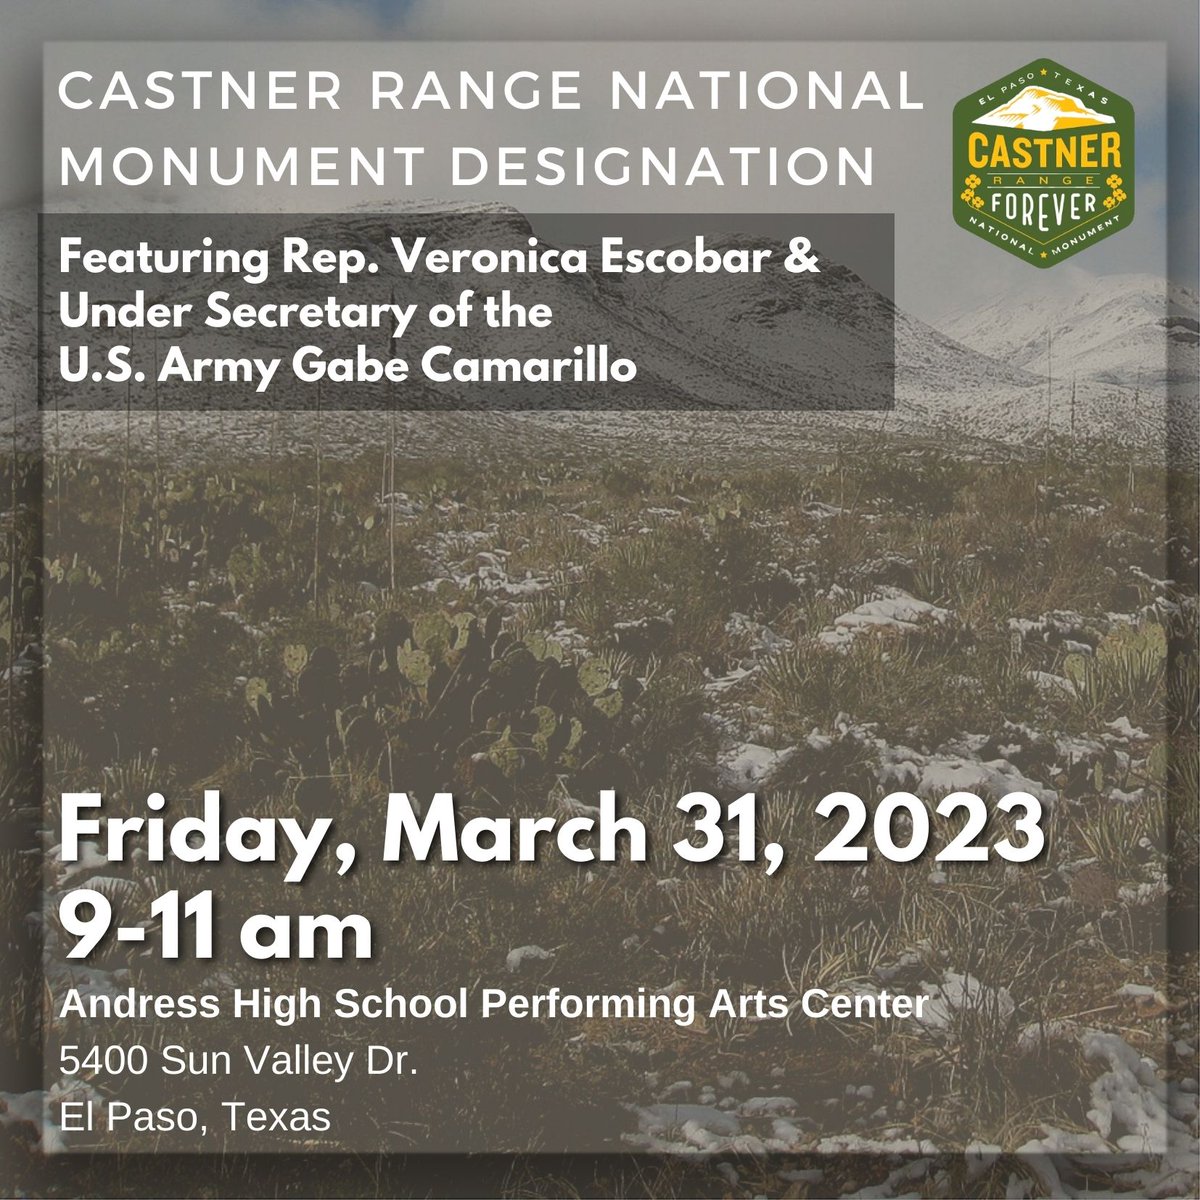 THIS FRIDAY! 

The Paso del Norte community is invited to celebrate the @CastnerRangeNM designation!

Congresswoman Veronica Escobar and Under Secretary of the U.S. Army Gabe Camarillo to 
speak at event to thank community and talk next steps. #Castner4Ever